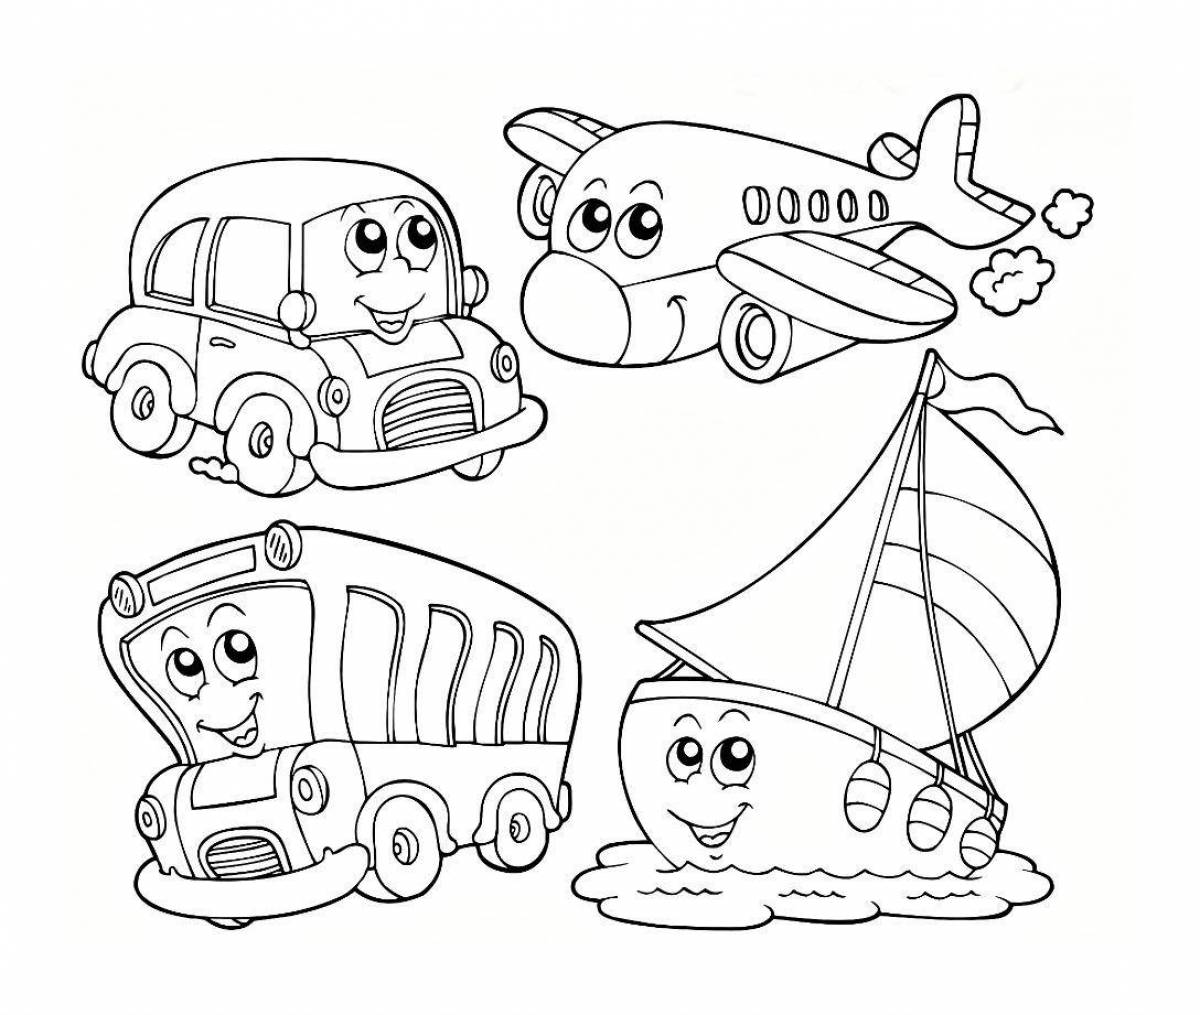 Great transport coloring book for kids 3-4 years old